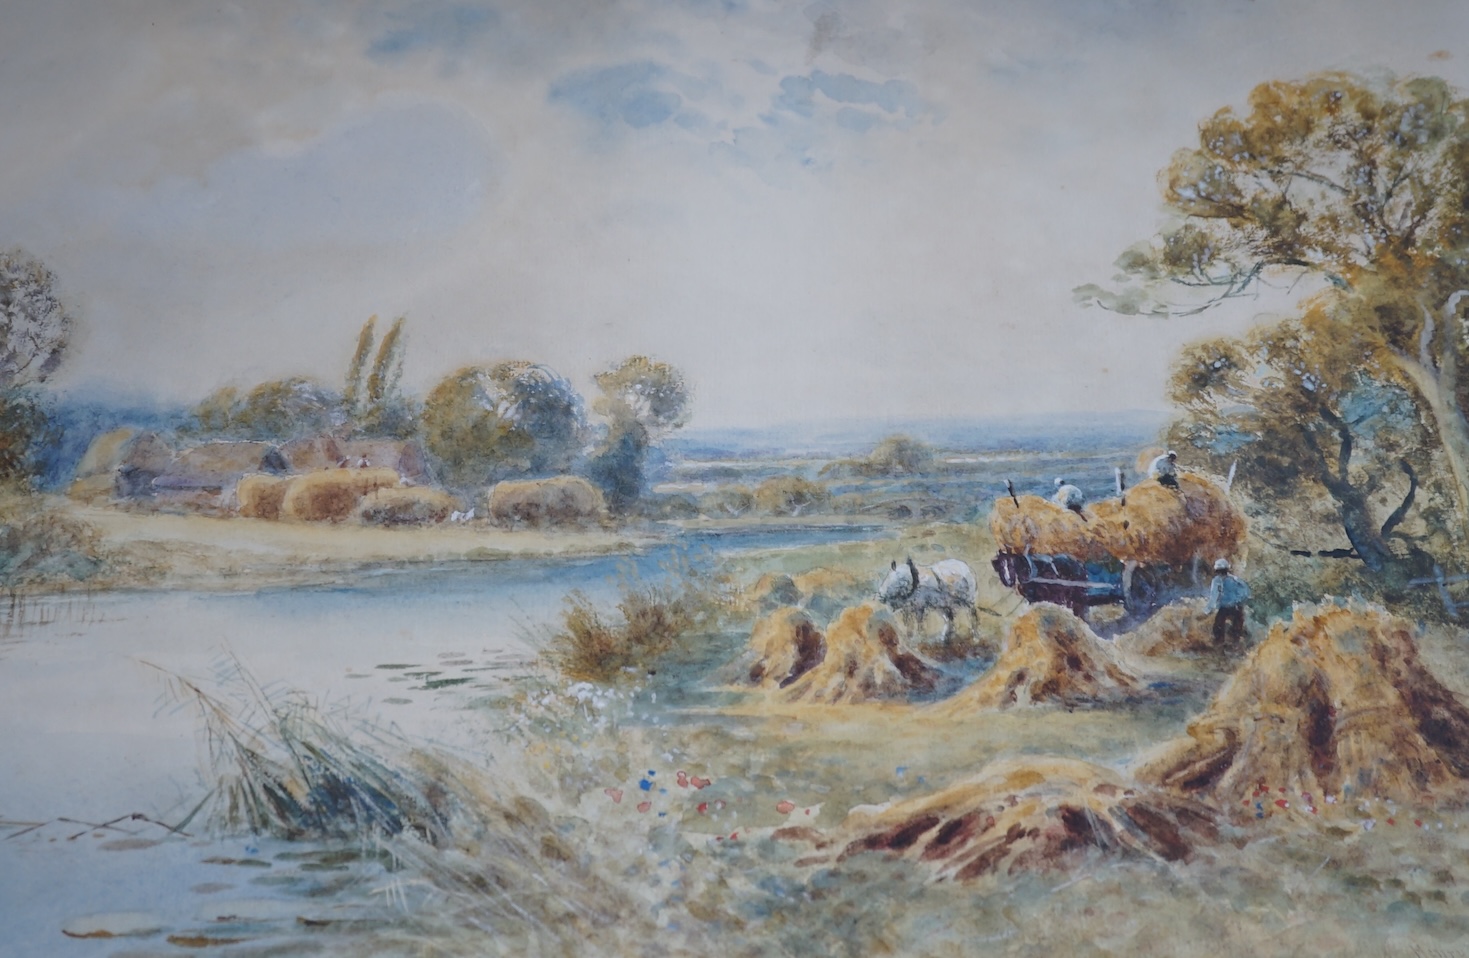 Henry John Kinnaird (fl.1880-1920), watercolour, figures haymaking beside a river, signed, 35.5 x 50cm. Condition - fair, some discolouration and foxing